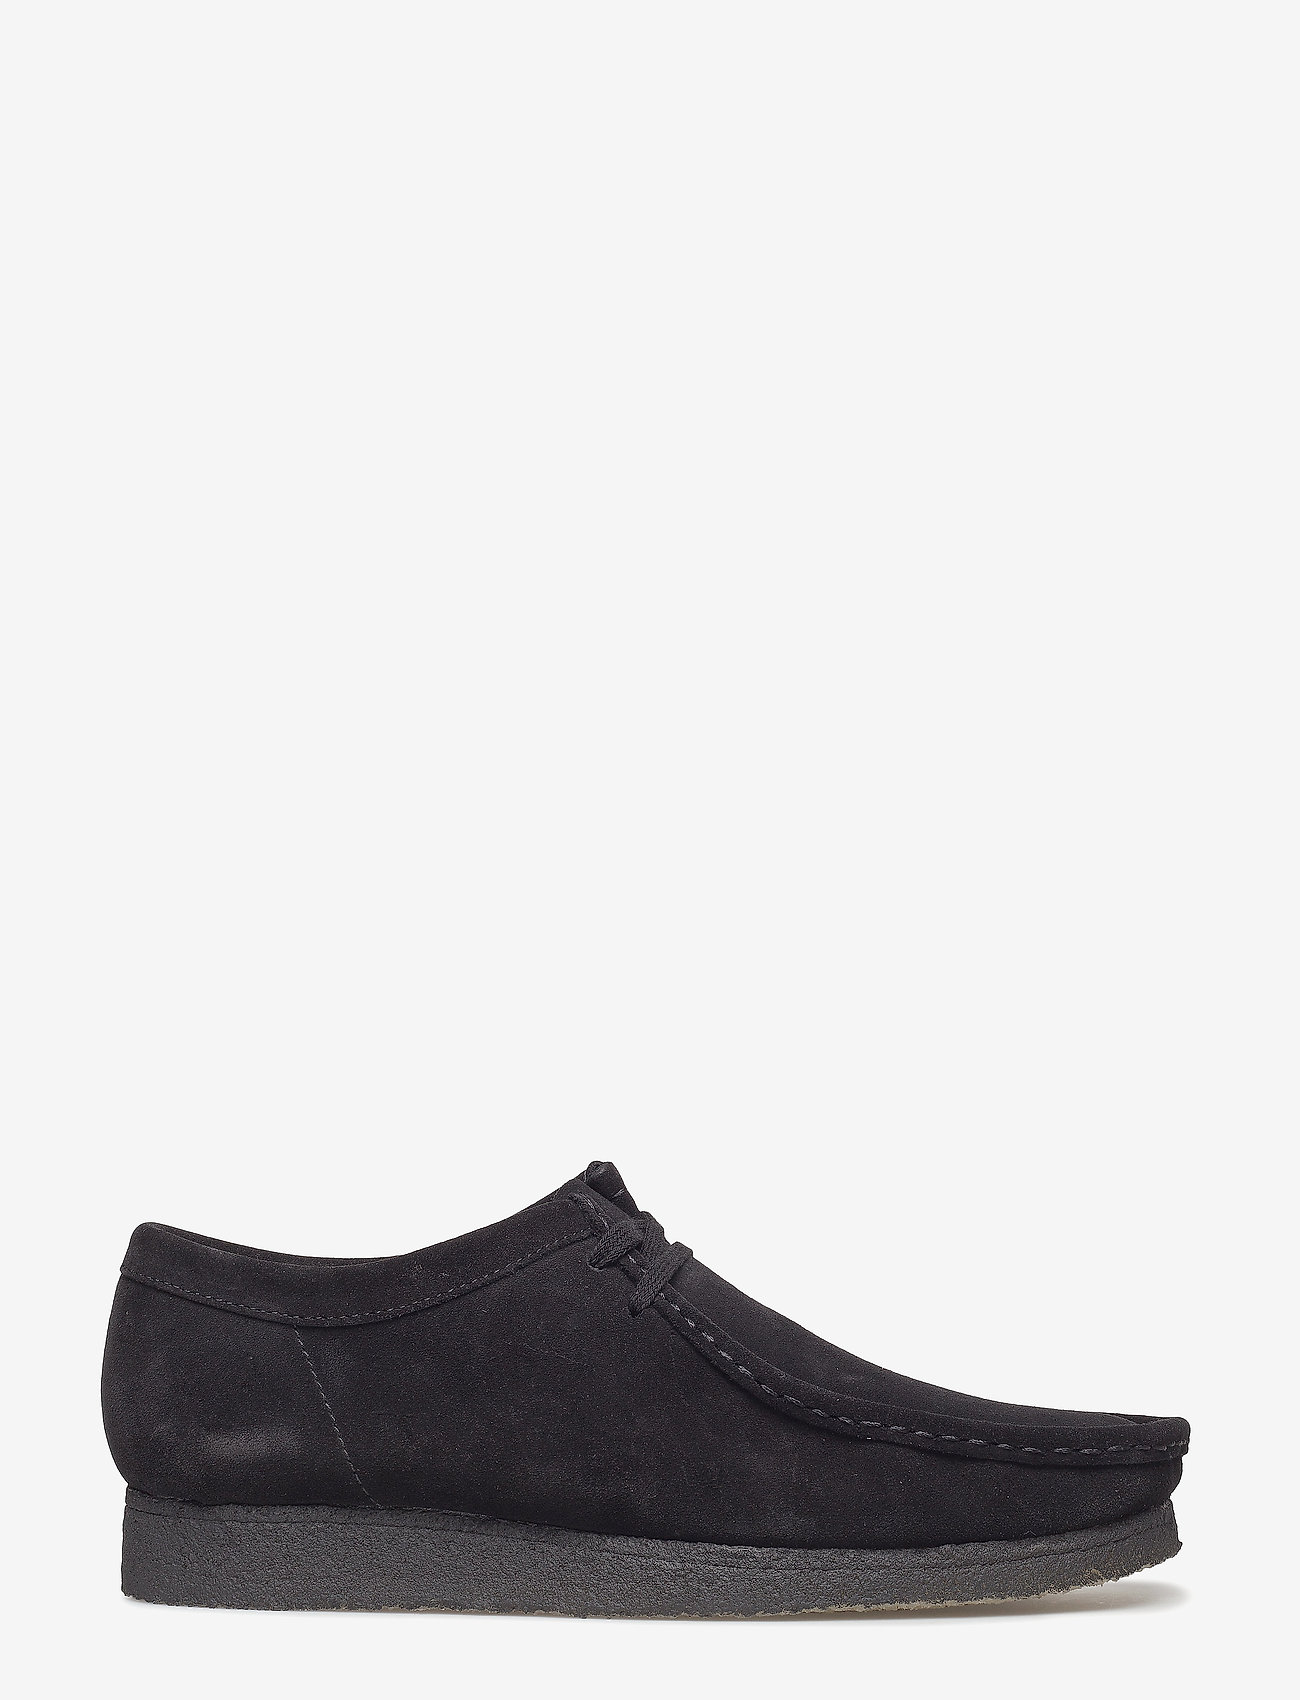 clarks wallabees black friday sale